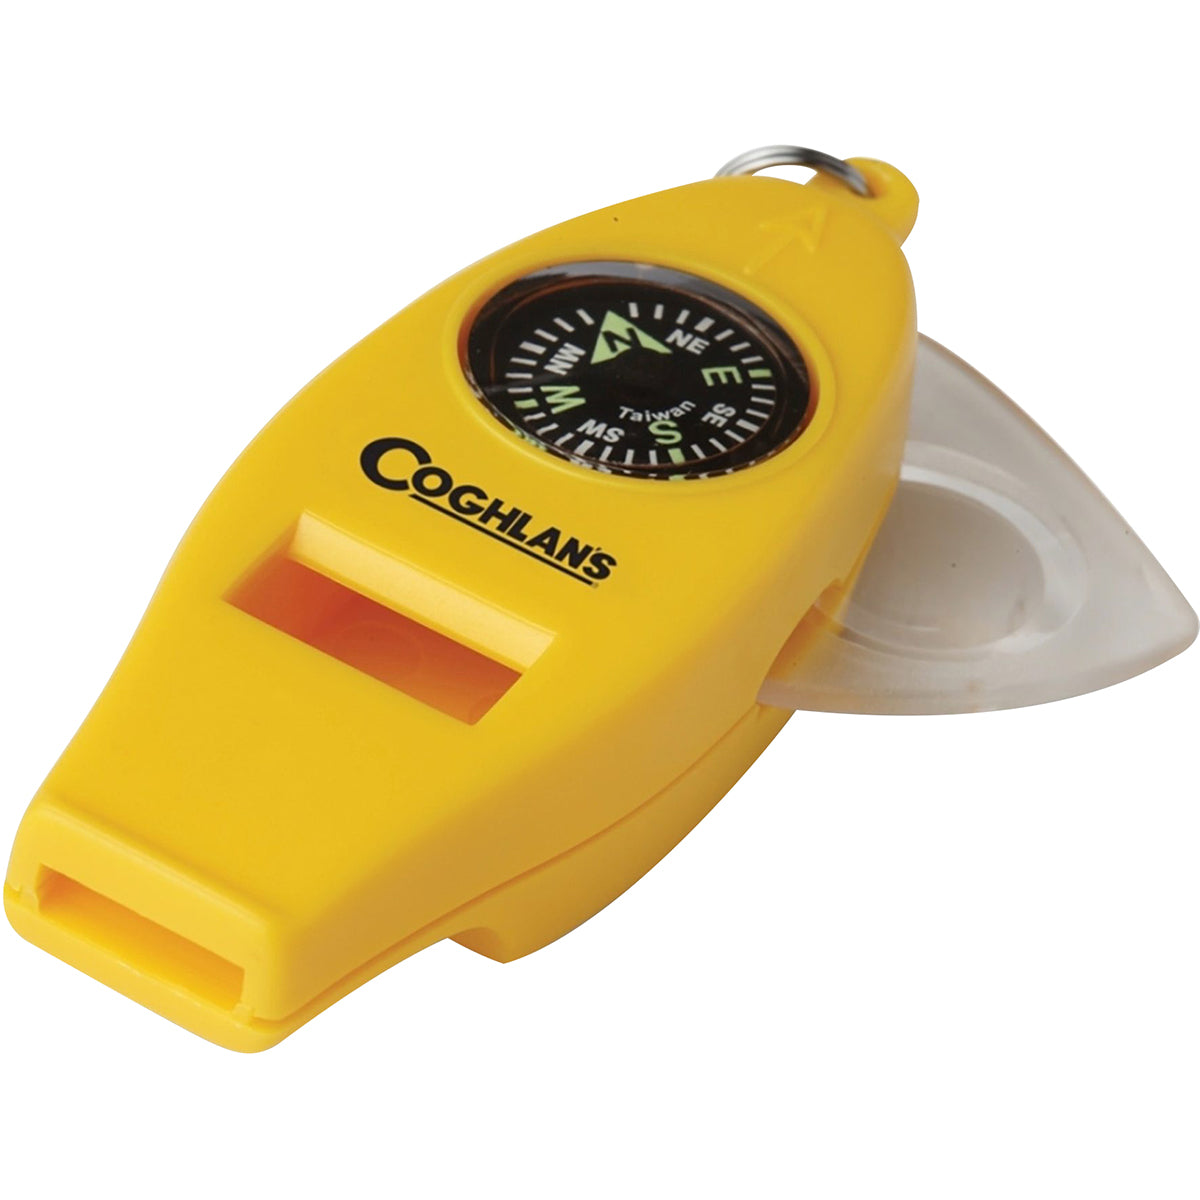 Coghlan's Four Function Whistle for Kids Camp Thermometer, Magnifier, Compass Coghlan's